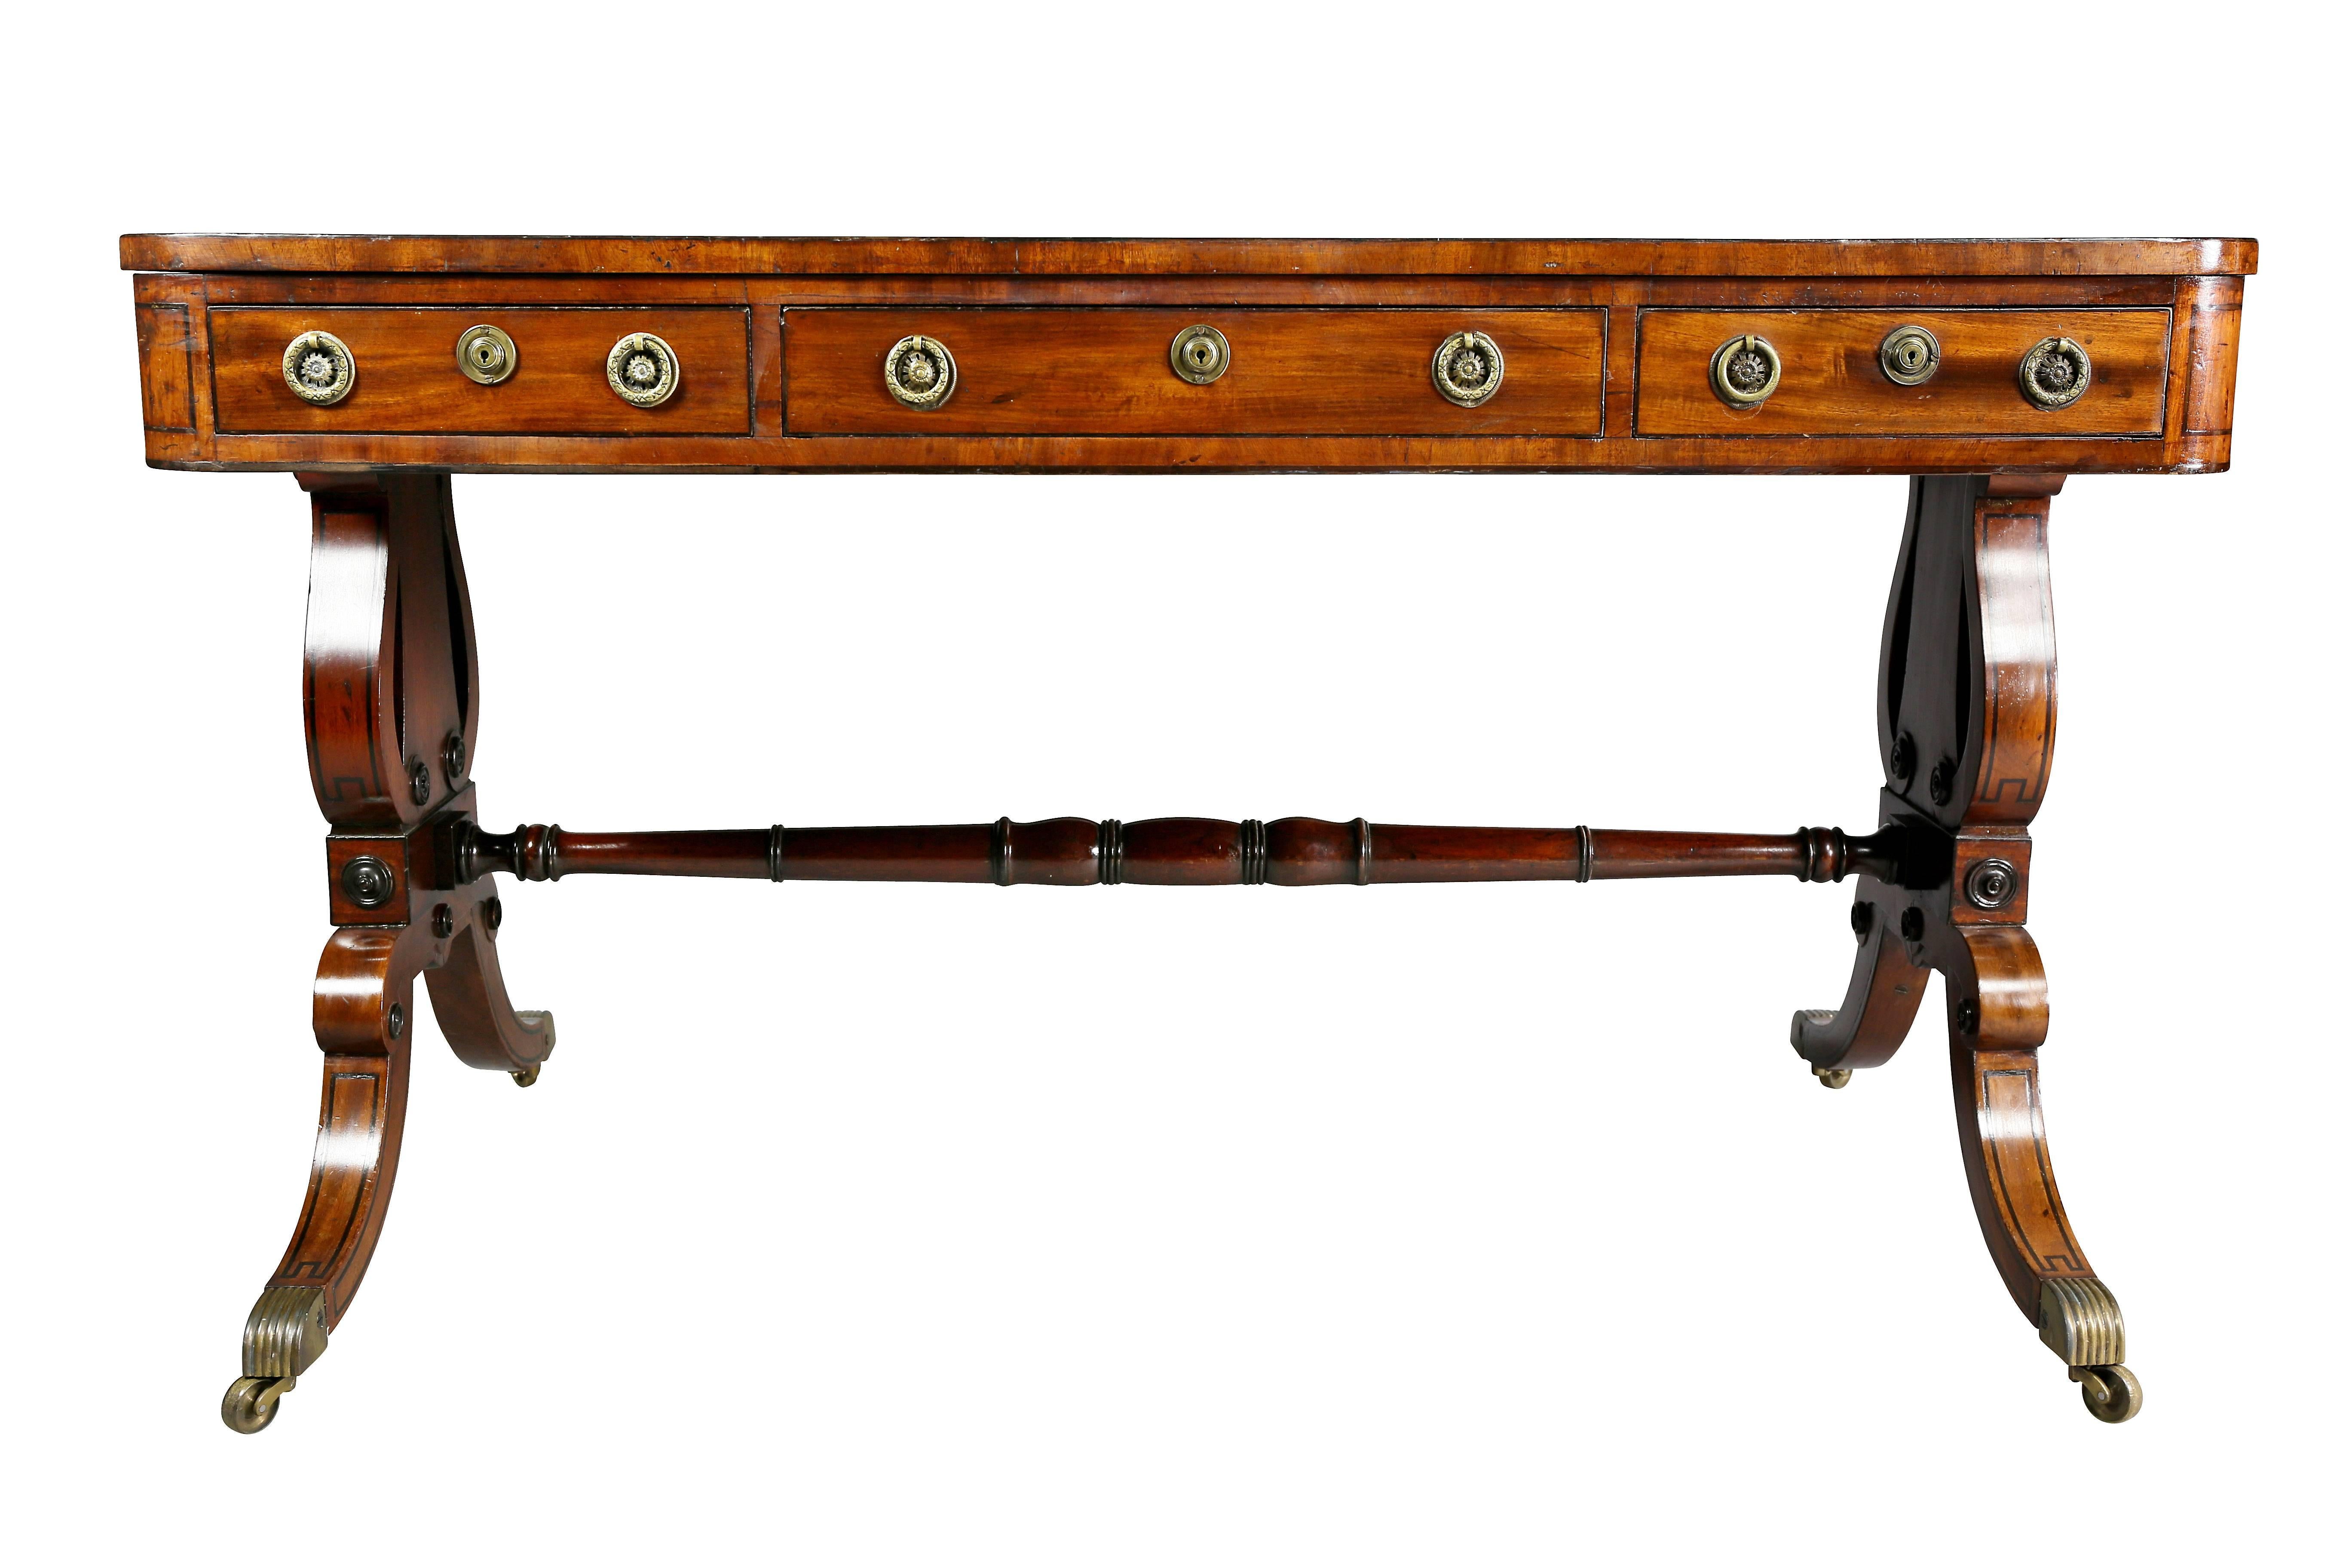 With new beautifully tooled green leather top with drawers on both sides, one side with three the other with a long drawer, raised on lyre form trestle base with mounted bosses and ebony inlays, joined by a turned stretcher and raised on saber legs